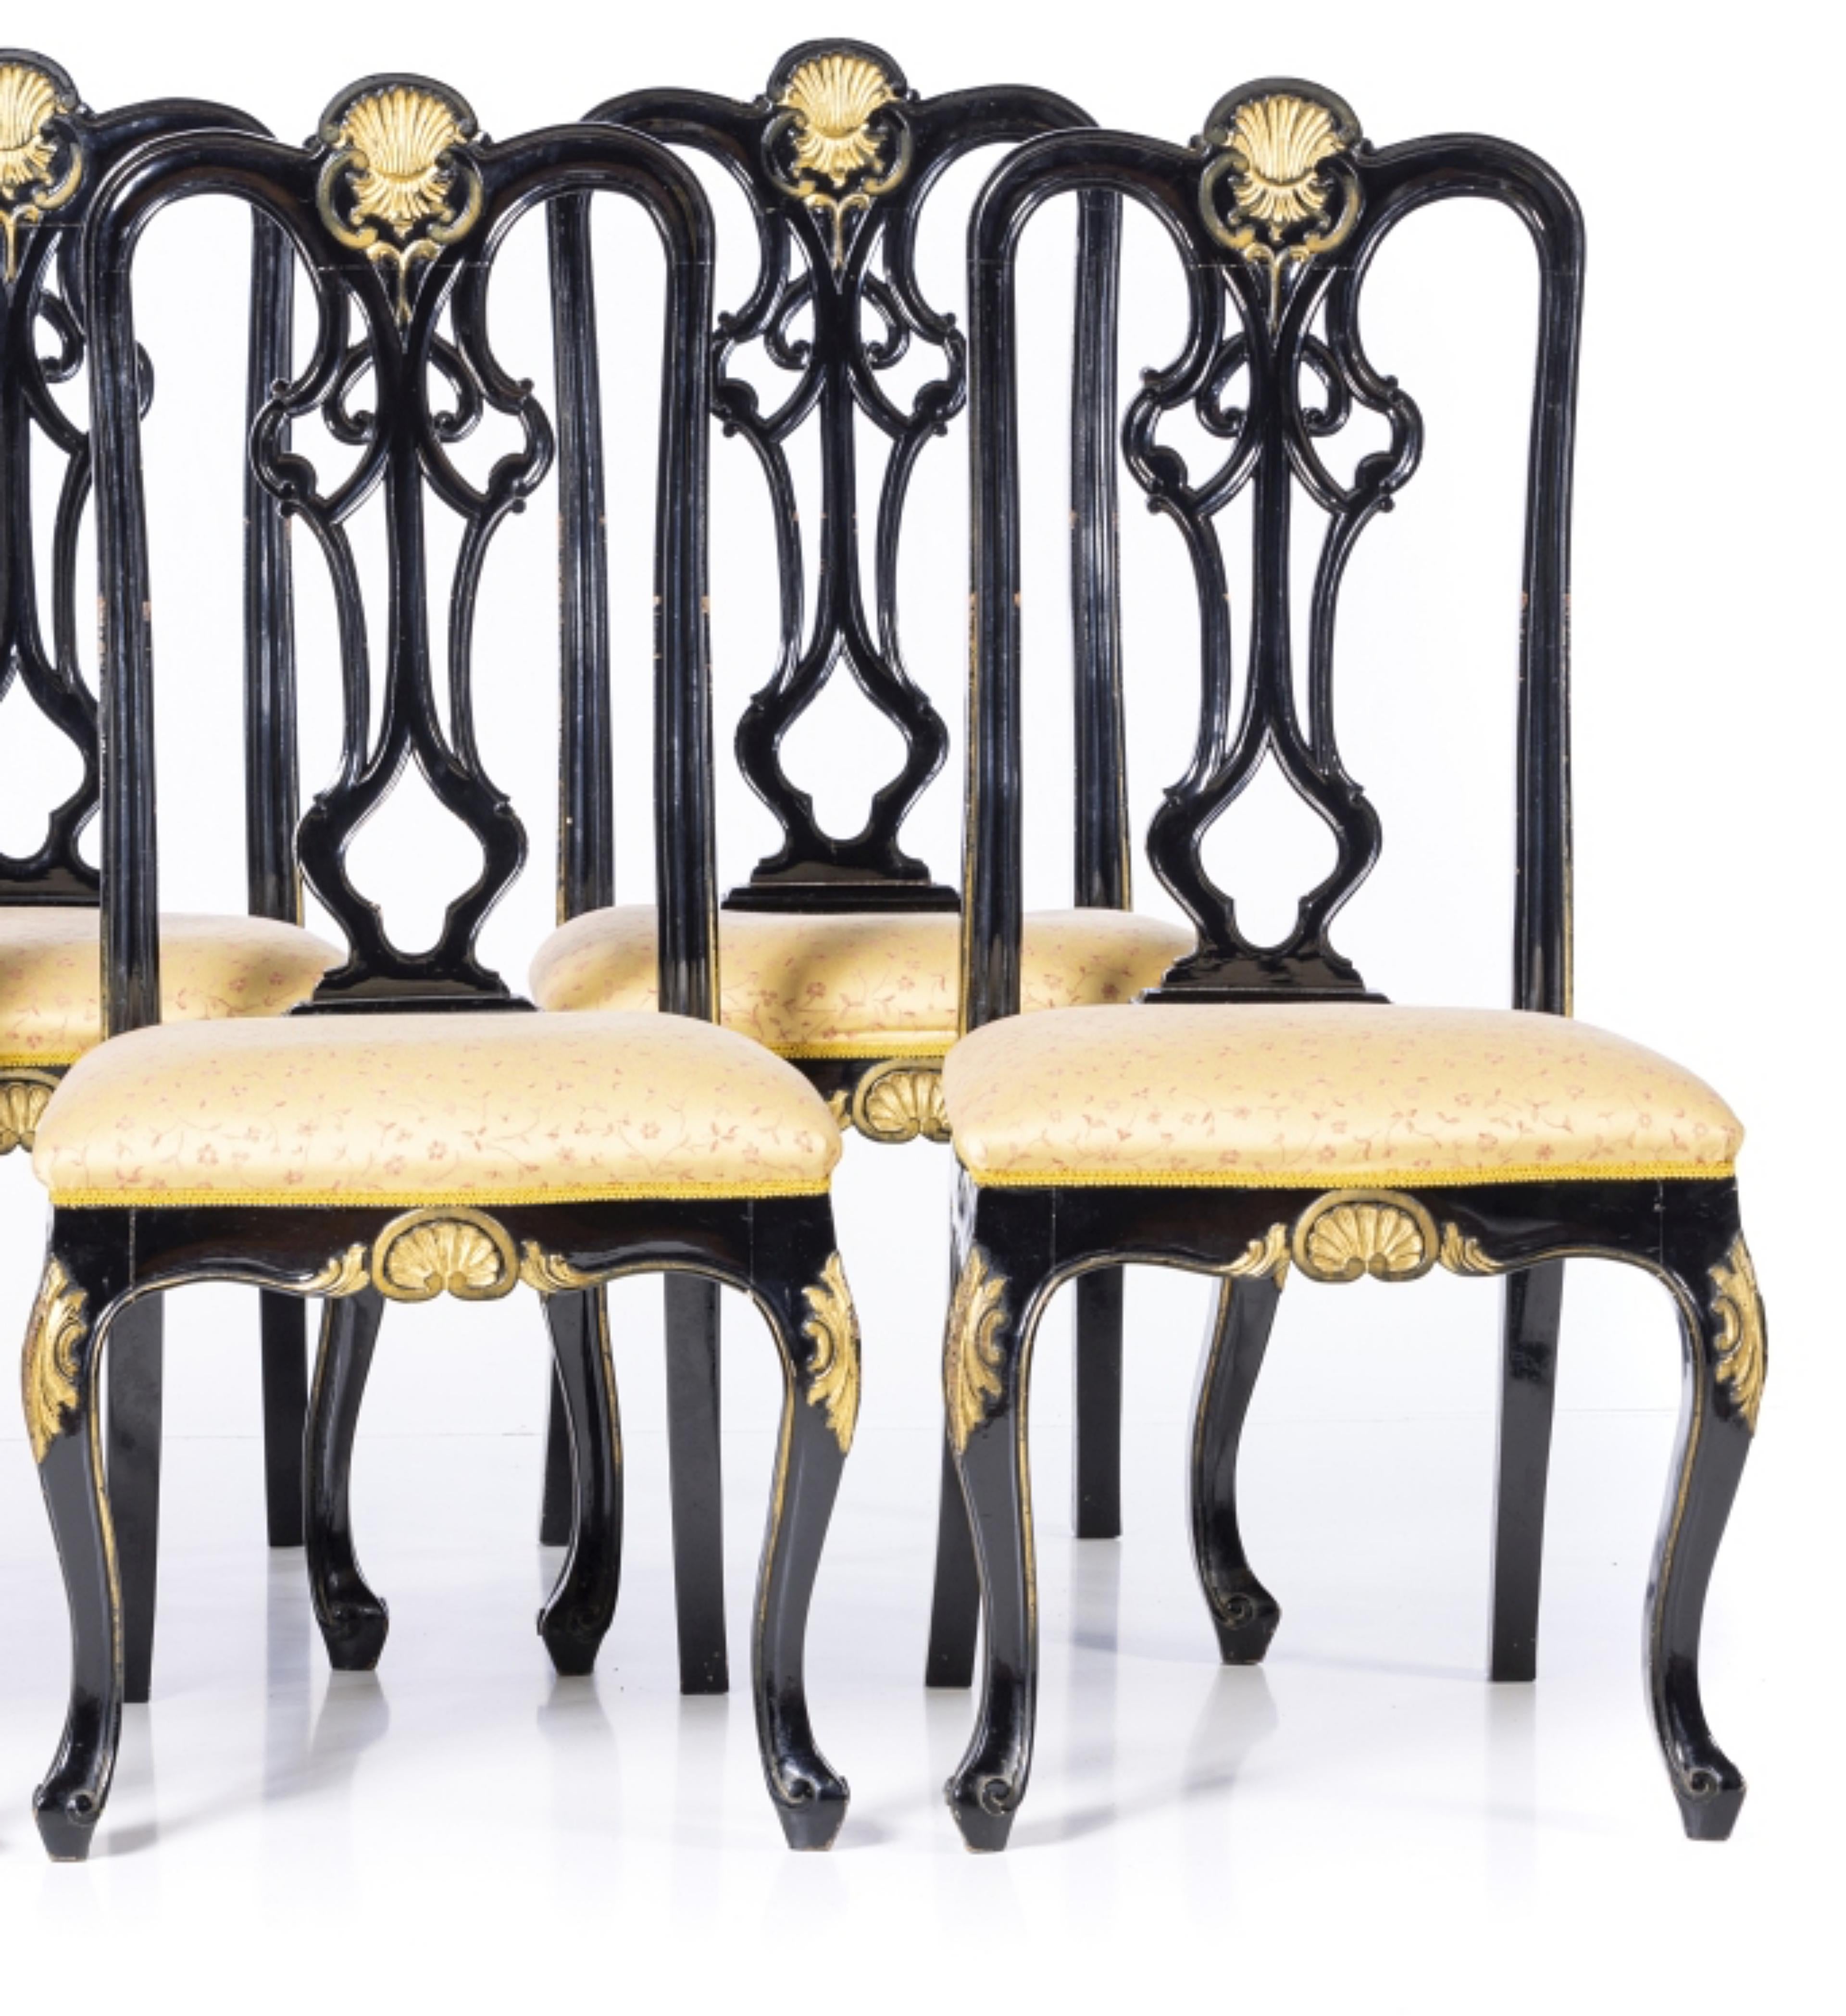 SET OF SIX CHAIRS

French, from the 20th century
in lacquered wood with gold. Hollow back, upholstered seats. 
Small Defects. 
Dim.: 109 x 52 x 43 cm